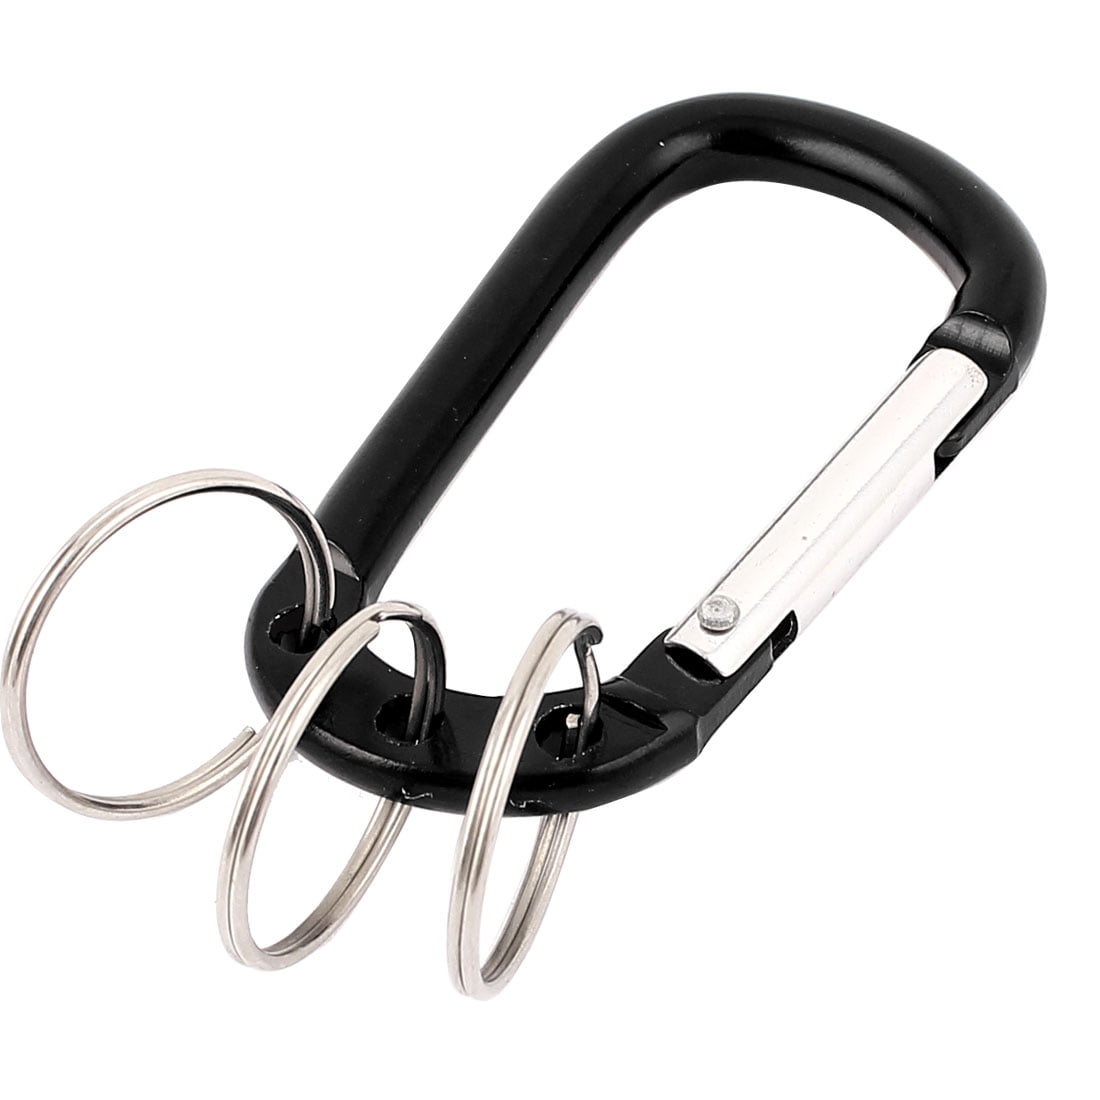 20 x Aluminum Alloy Carabiners D-Ring Snap Link Key Chain for Outdoor Black 